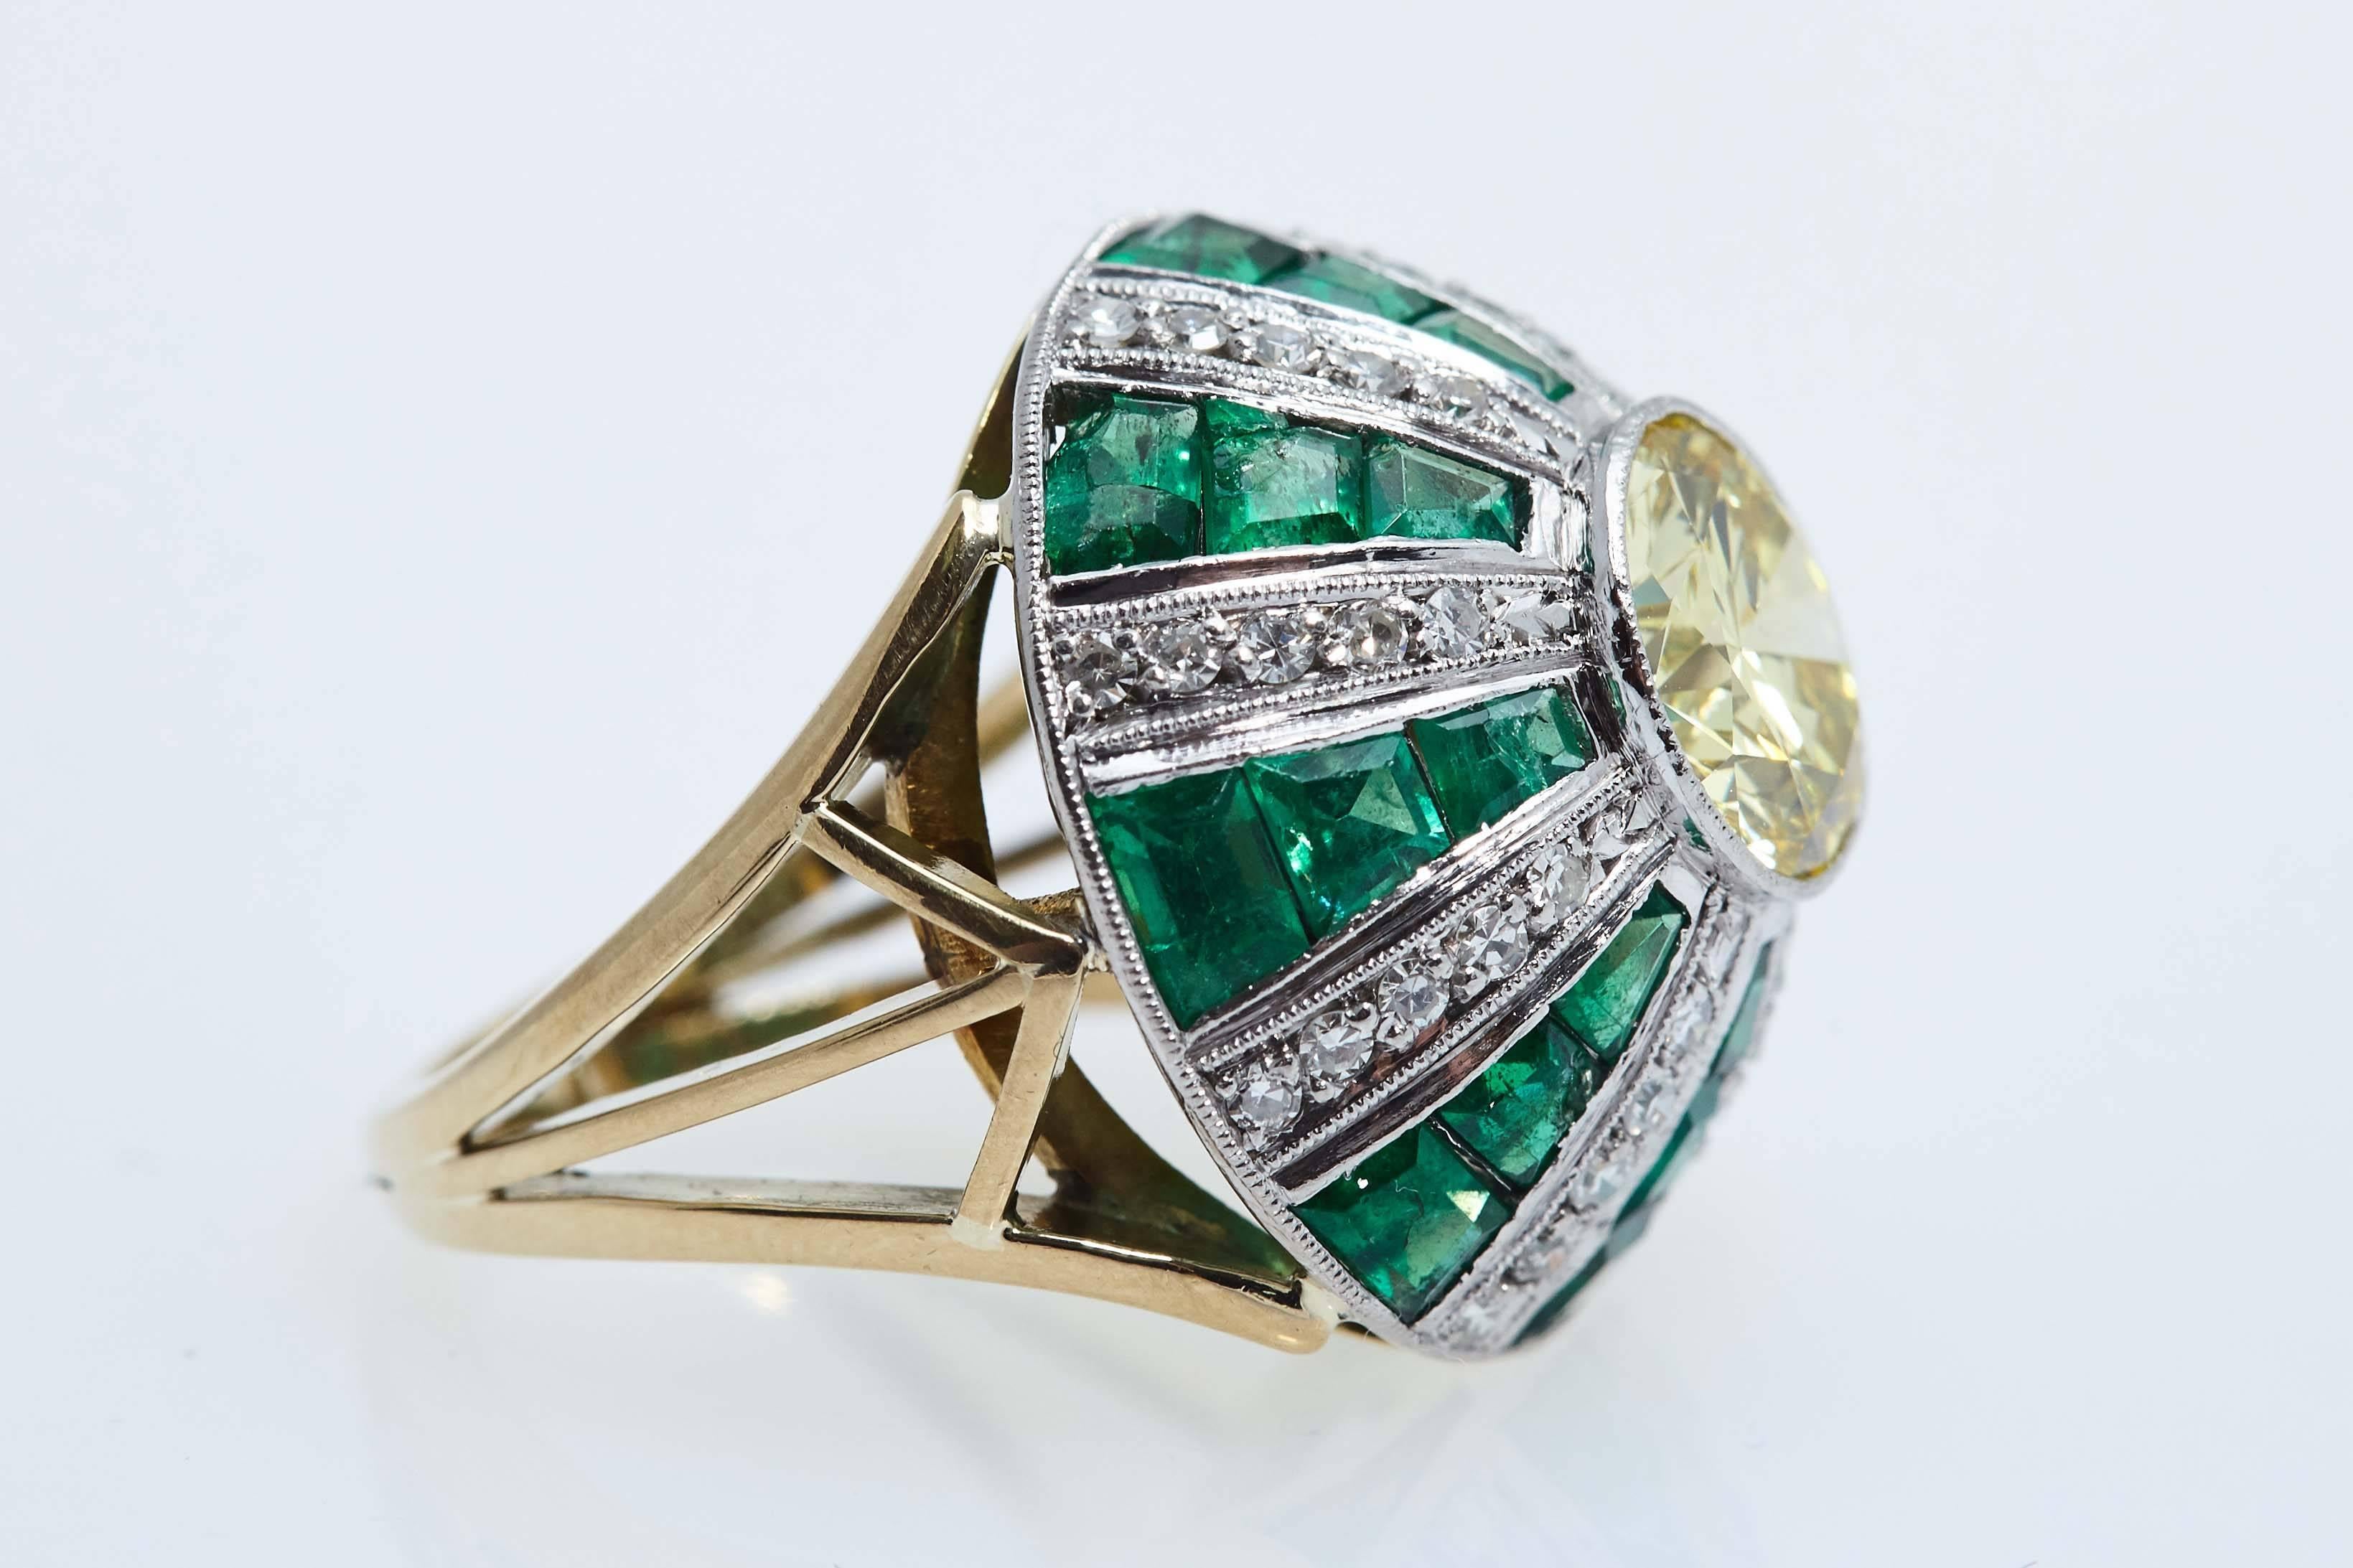 Round diamond weighing 2.62 carats in the center, GIA certificate Fancy Yellow and SI1 in clarity.  The ring has a dome design with emeralds and diamonds going up towards the center diamond. The ring measures 7/8" across at its widest point and